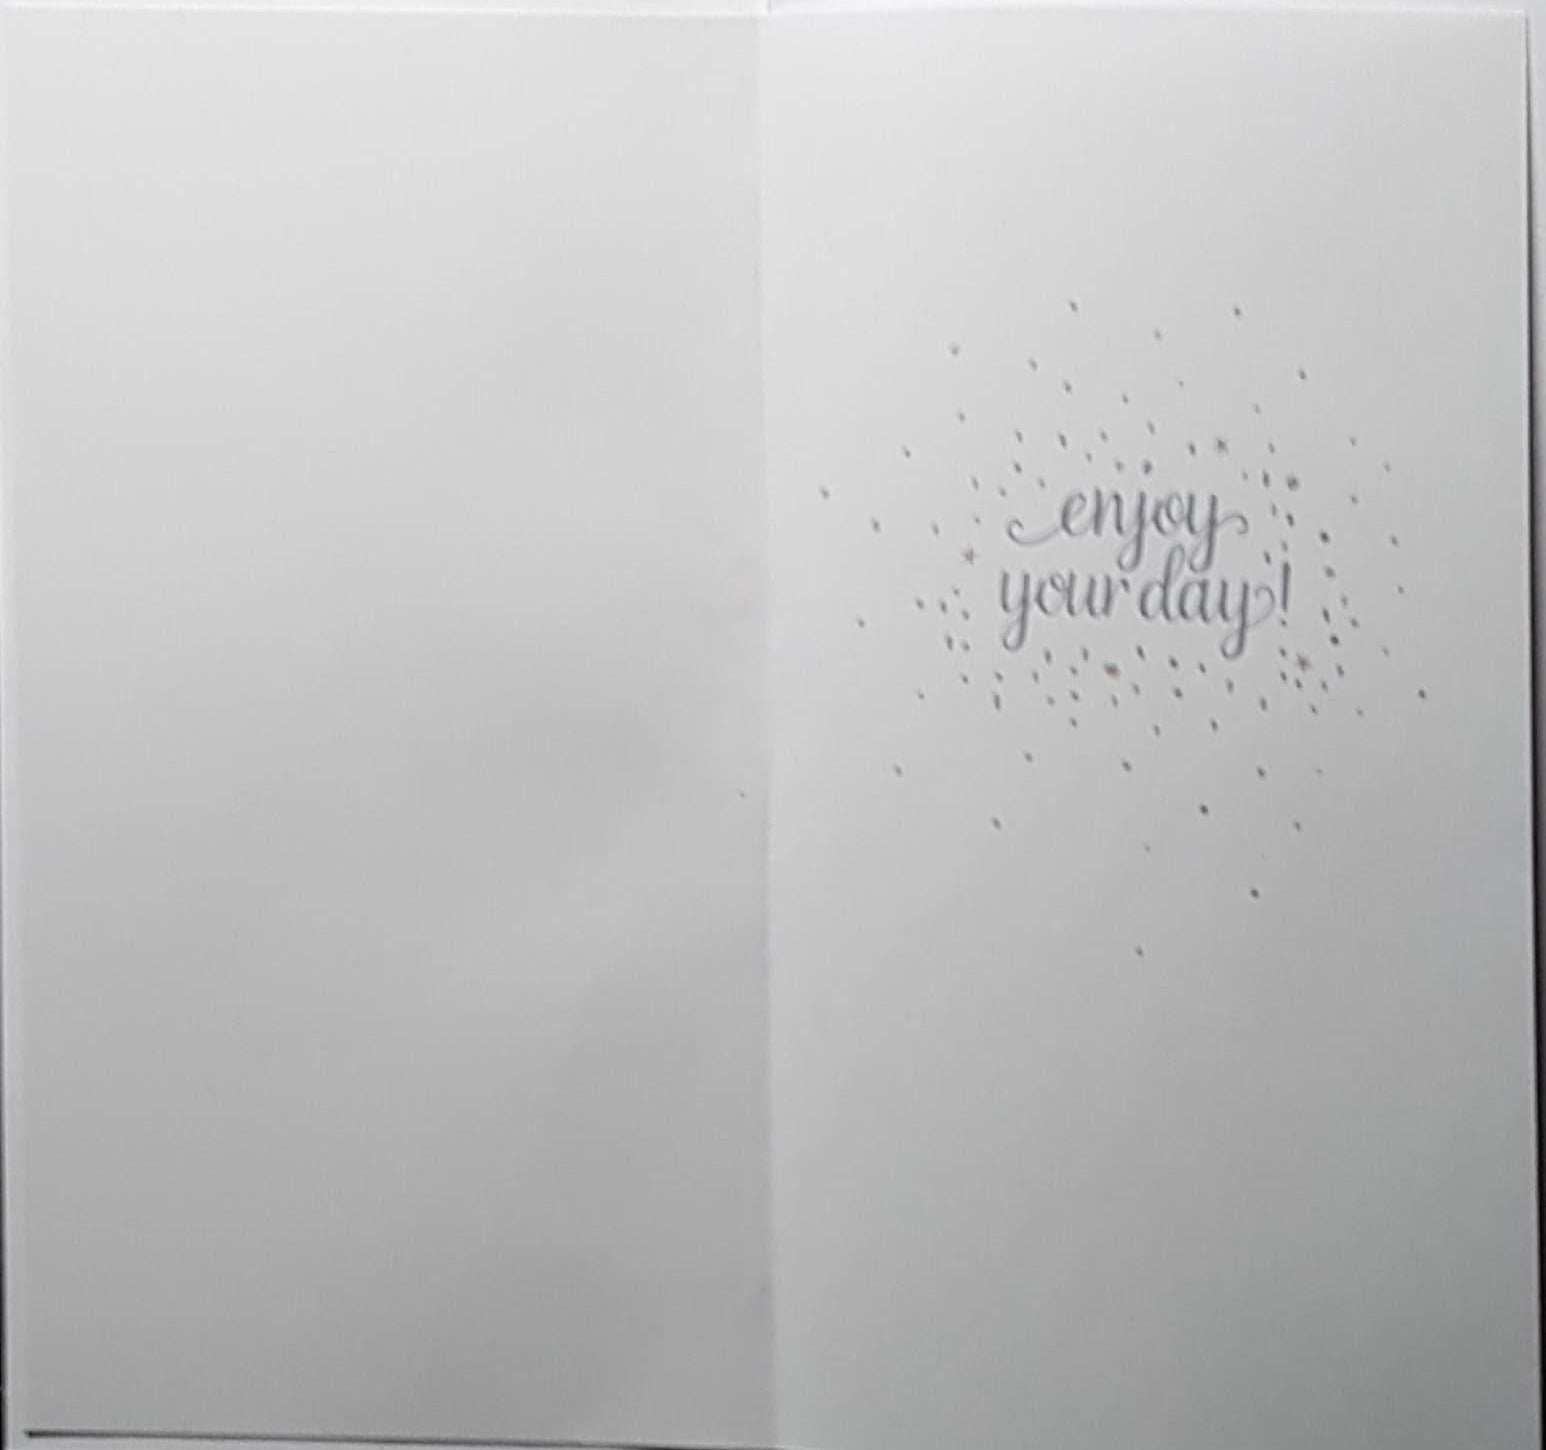 Age 30 Birthday Card - Silver & Gold Font & Sparkly Droplets